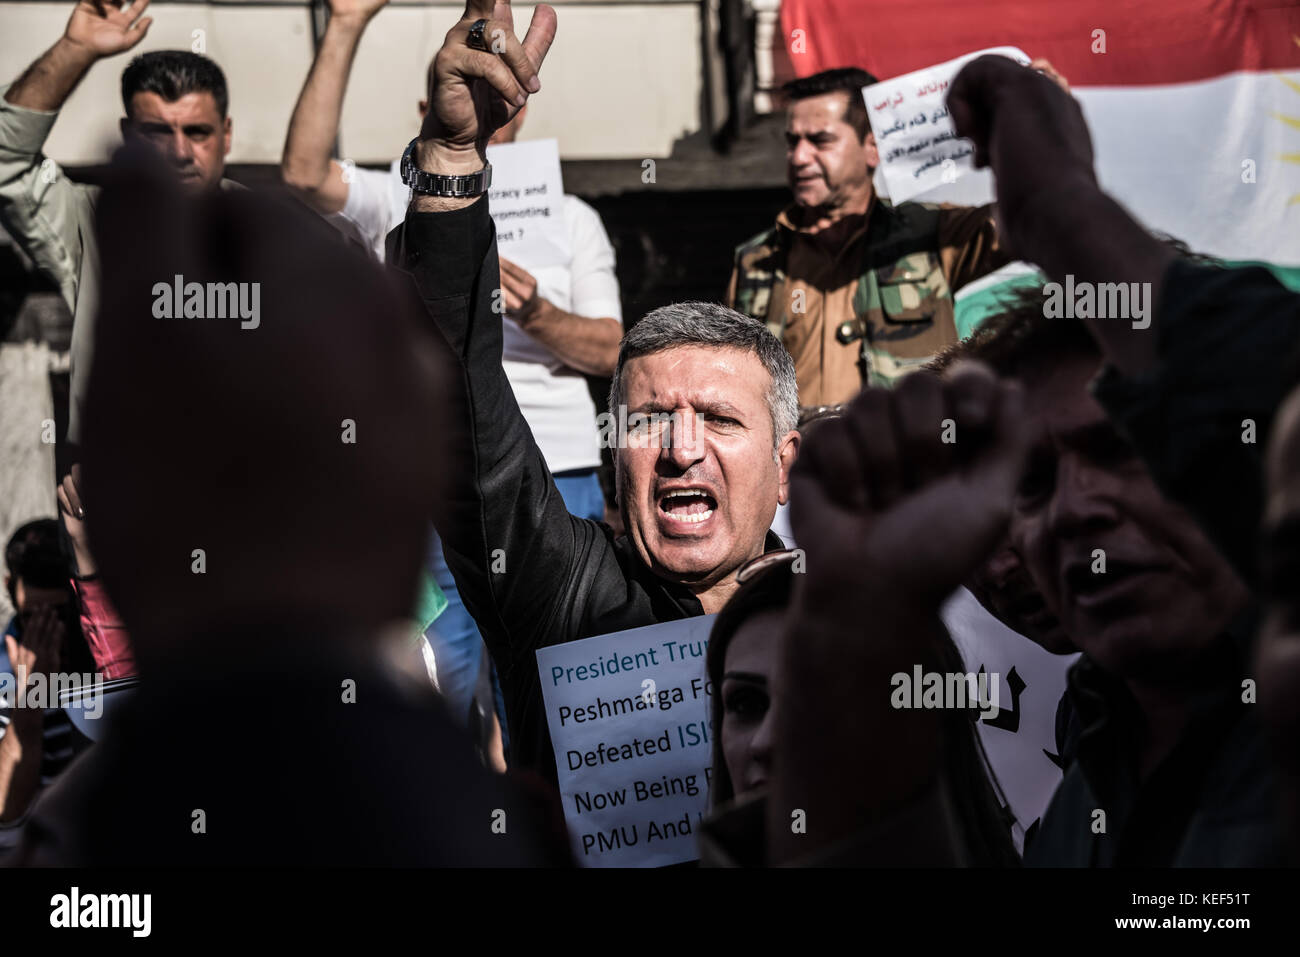 Erbil, Iraq. 20th Oct, 2017. Kurds displaced from Kirkuk by the ongoing conflict, between Iraq allied with Iranian backed Militia group Hashd al Shaabi and the semi autonomous Kurdistan region, protest outside the US Embassy in Erbil. They are asking where the international community was and why it didn't help them to keep Kirkuk. Erbil, Iraq Credit: Elizabeth Fitt/Alamy Live News Stock Photo